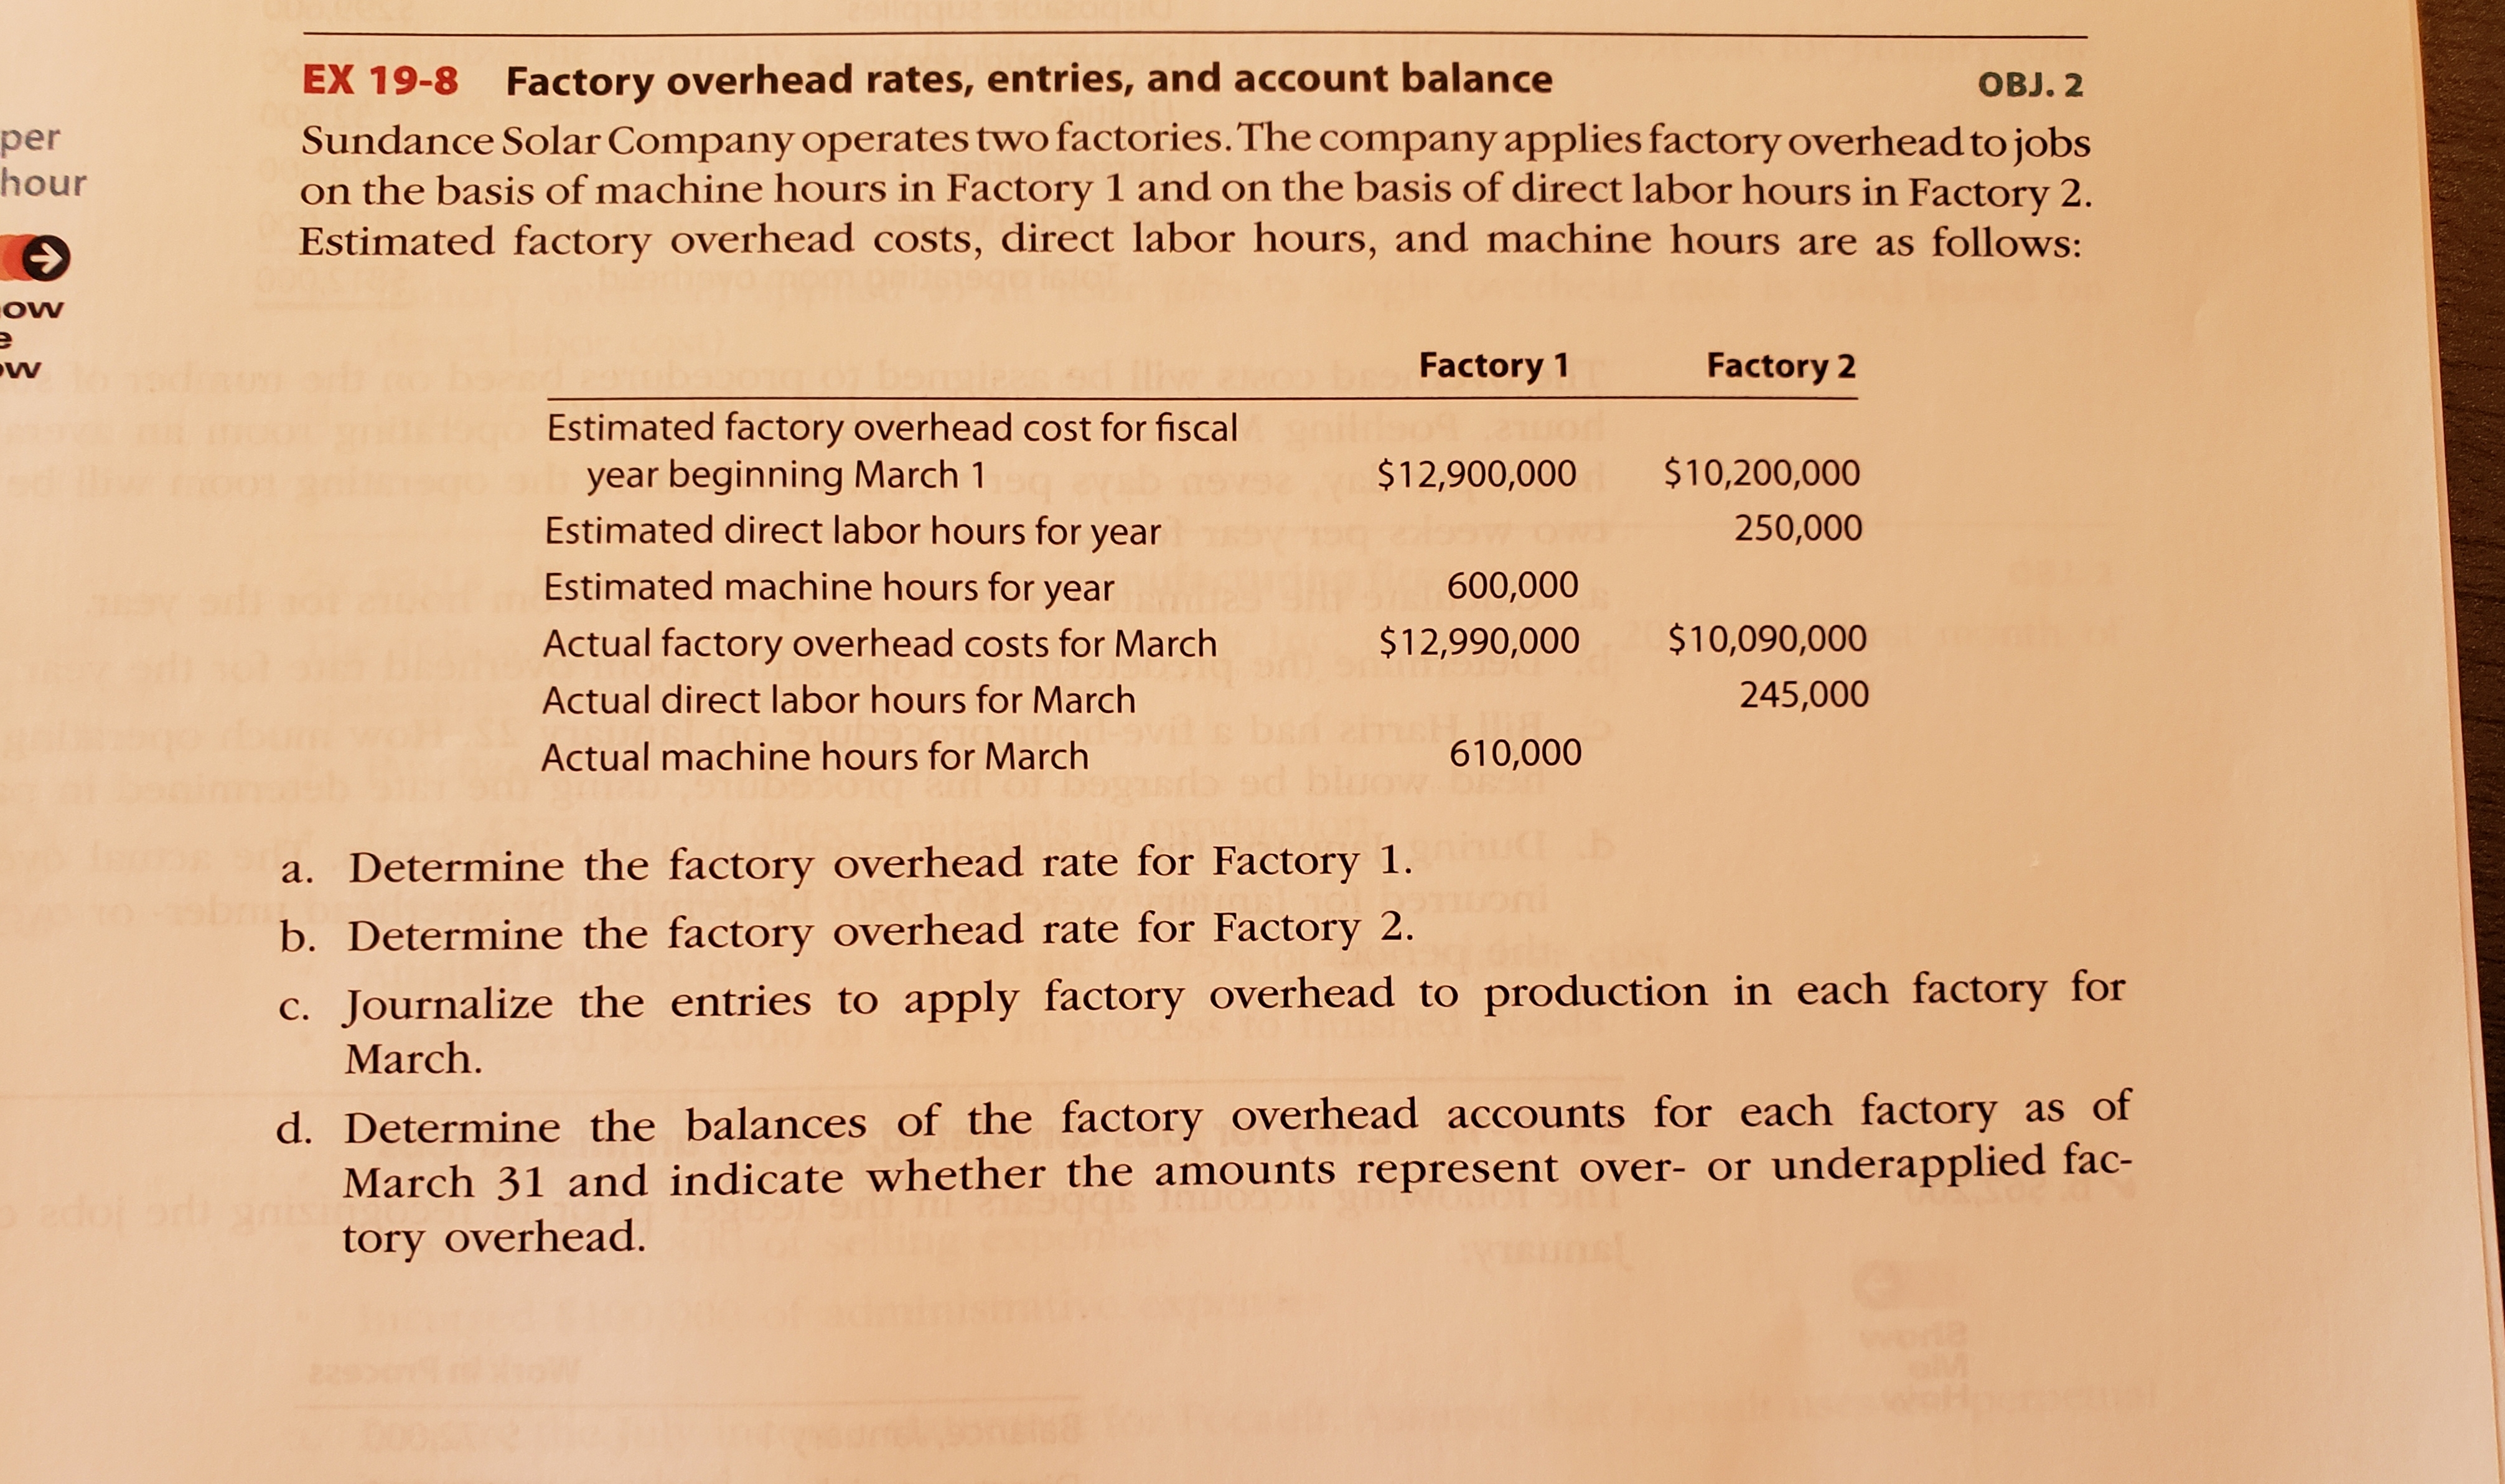 EX 19-8 Factory overhead rates, entries, and account balance
OBJ. 2
Sundance Solar Company operates two factories.The company applies factory overhead to jobs
on the basis of machine hours in Factory 1 and on the basis of direct labor hours in Factory 2.
Estimated factory overhead costs, direct labor hours, and machine hours are as follows:
per
hour
Factory 1
Factory 2
Estimated factory overhead cost for fiscal
year beginning March 1
Estimated direct labor hours for year
Estimated machine hours for year
$12,900,000 $10,200,000
250,000
600,000
Actual factory overhead costs for March
$12,990,000
$10,090,000
Actual direct labor hours for March
245,000
Actual machine hours for March
610,000
a. Determine the factory overhead rate for Factory 1.
b. Determine the factory overhead rate for Factory 2.
c. Journalize the entries to apply factory overhead to production in each factory for
March.
d. Determine the balances of the factory overhead accounts for each factory as of
March 31 and indicate whether the amounts represent over- or underapplied fac-
edoj
tory overhead.
